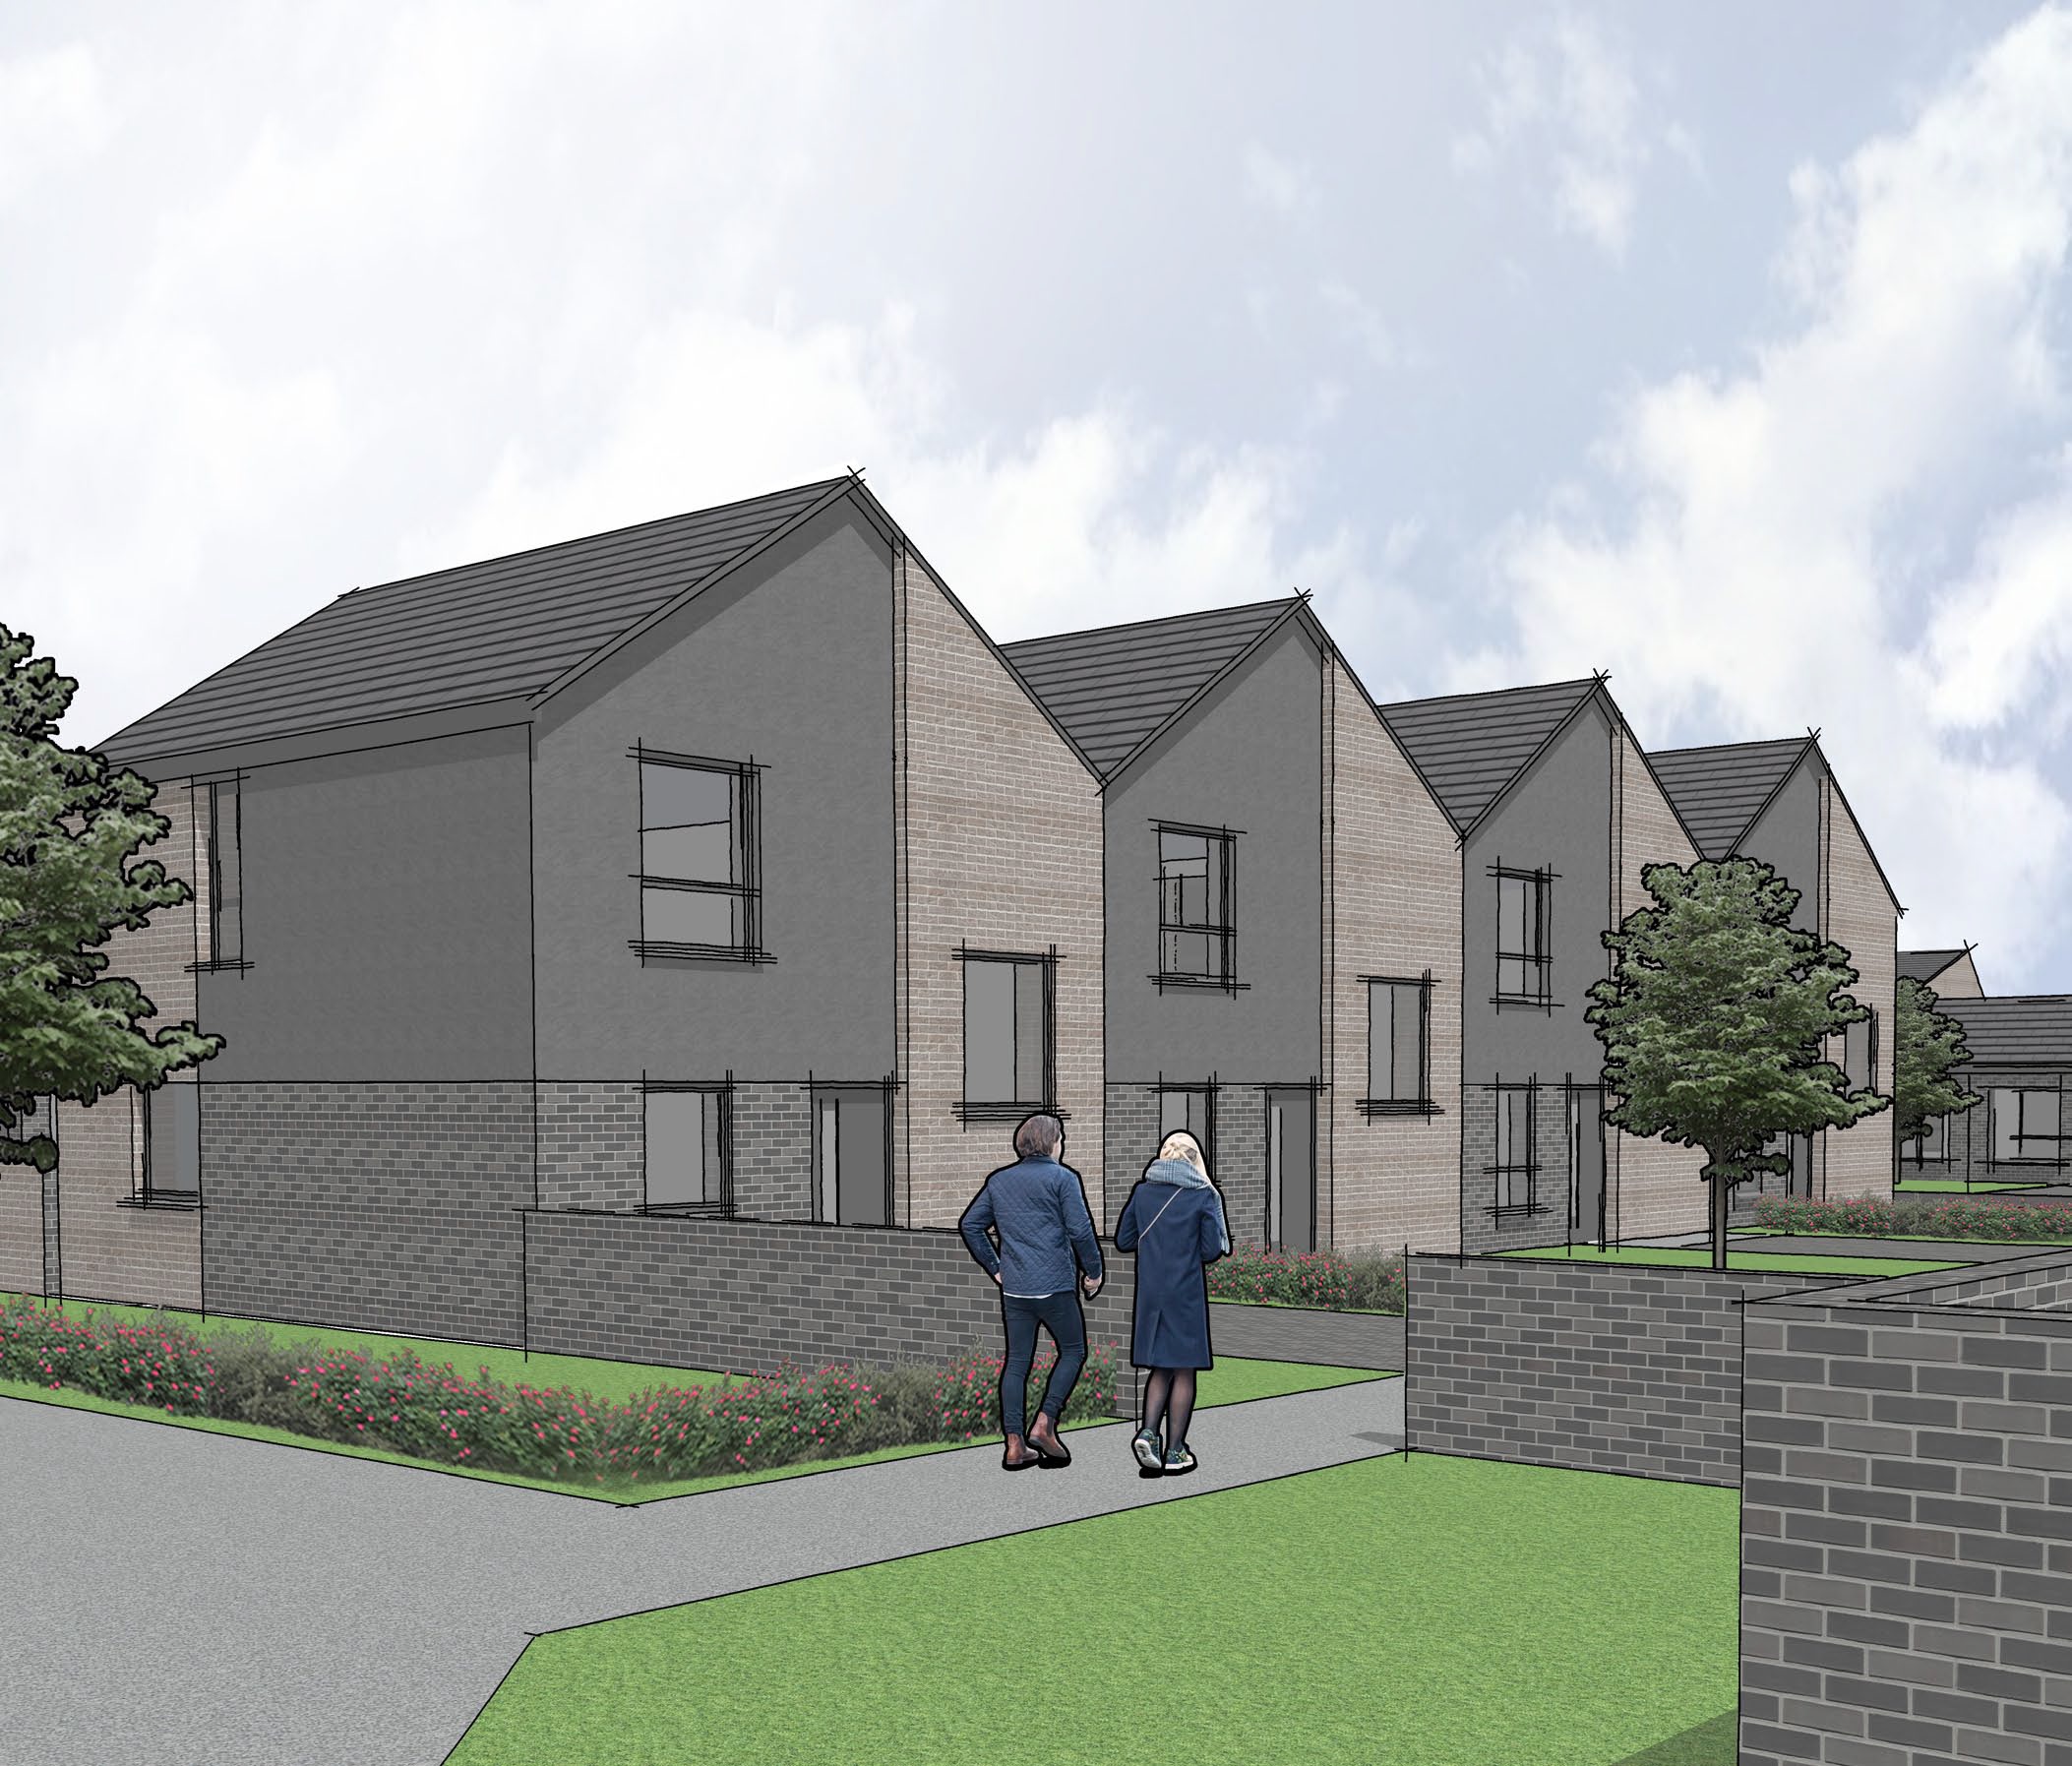 Construction resumes on new North Ayrshire council houses